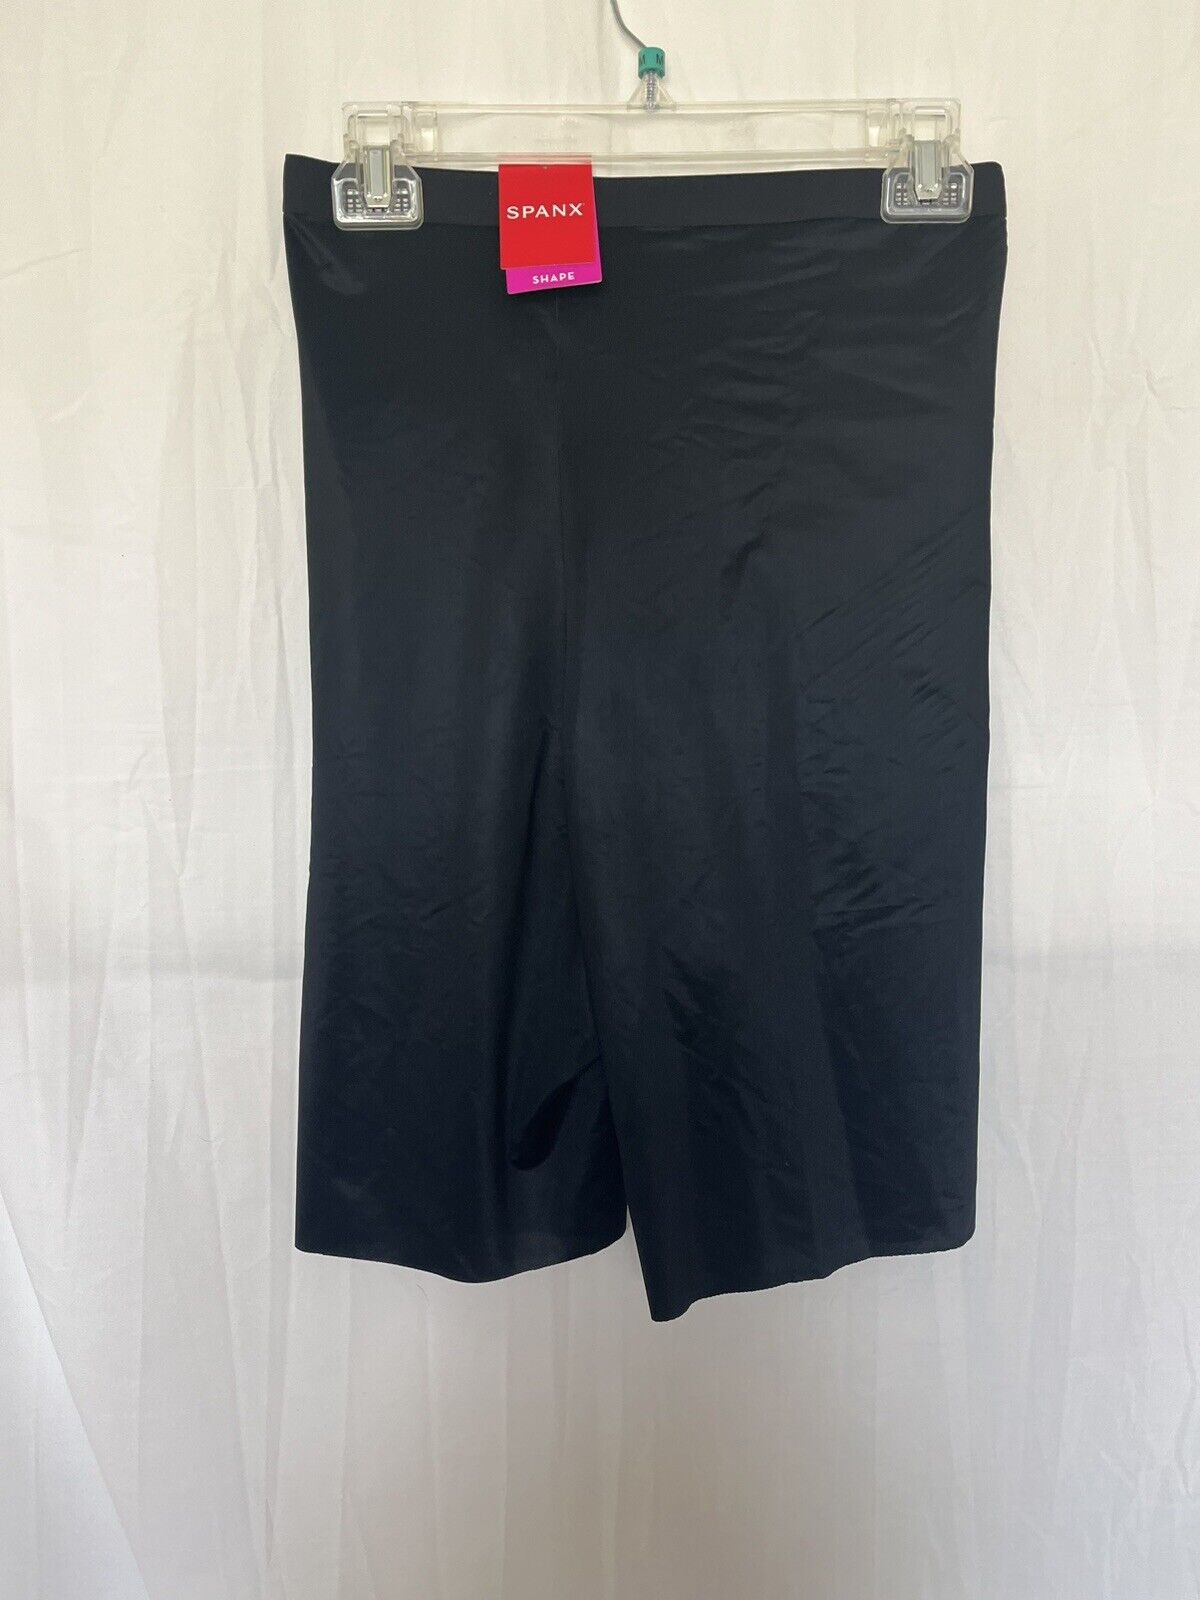 Spanx Thinstincts High-Waisted Mid-Thigh Short Black Size XL (10233R)